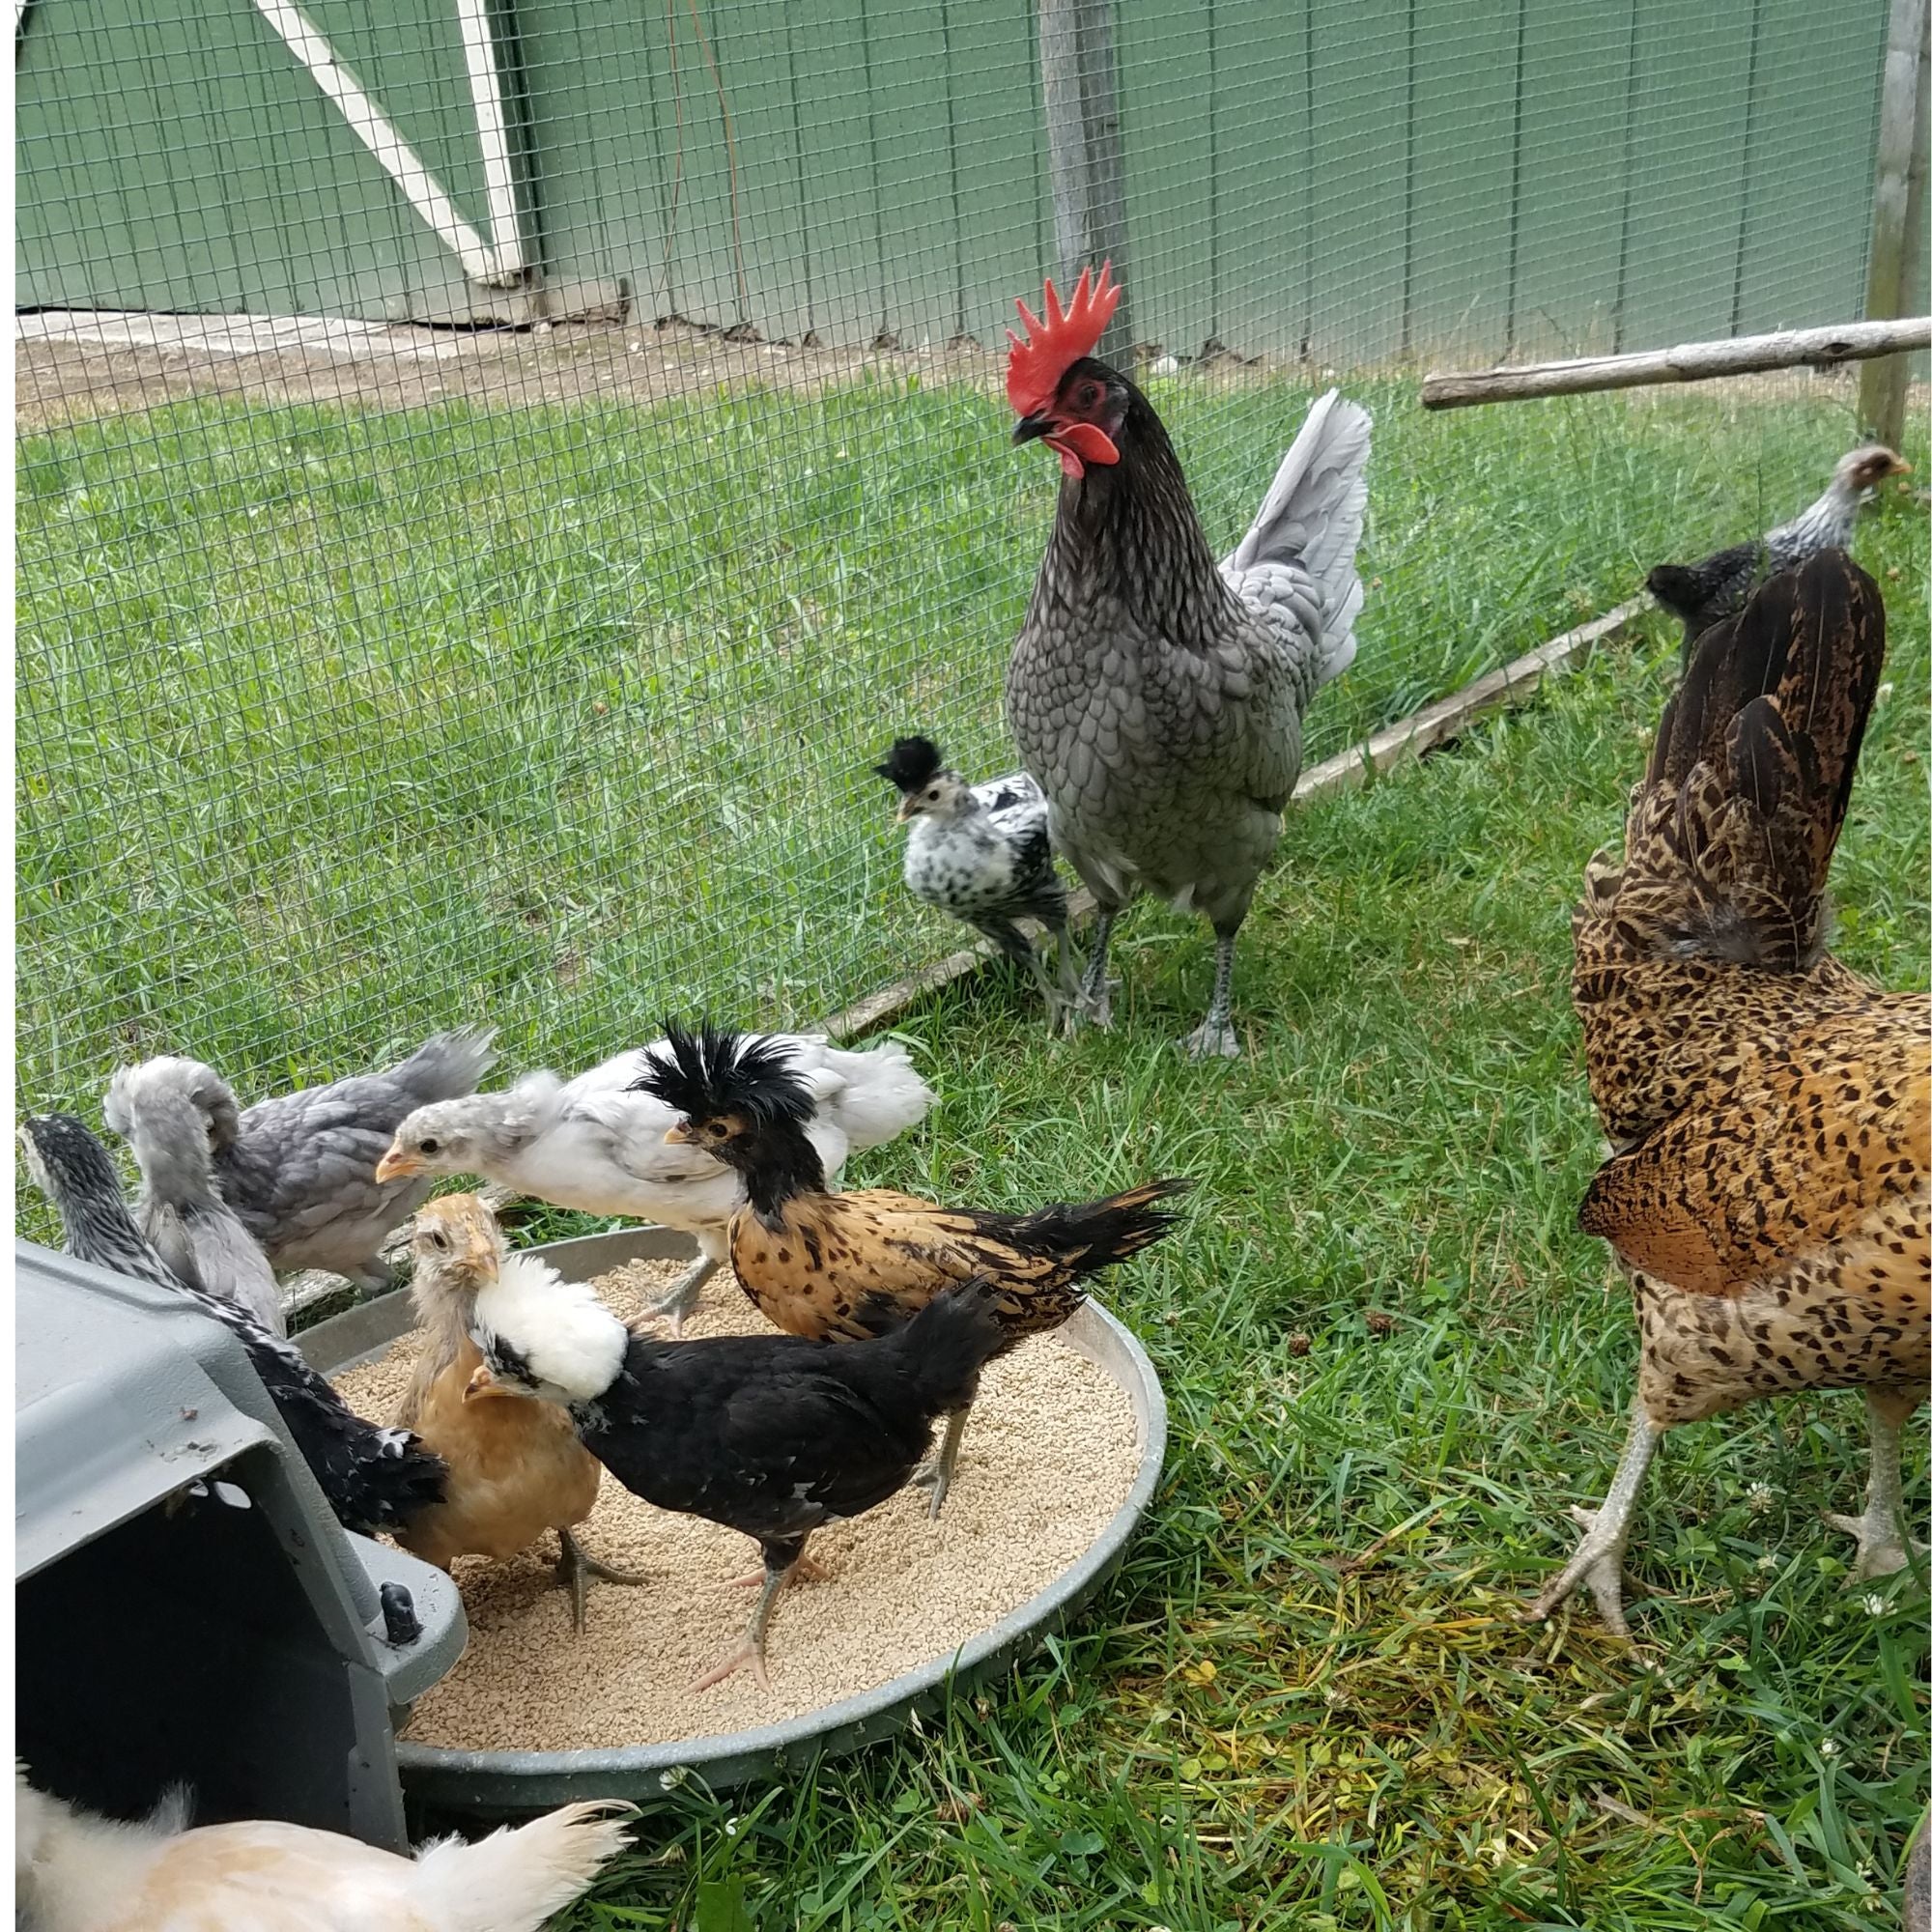 A slow introduction is best when adding new members to your chicken flock. 